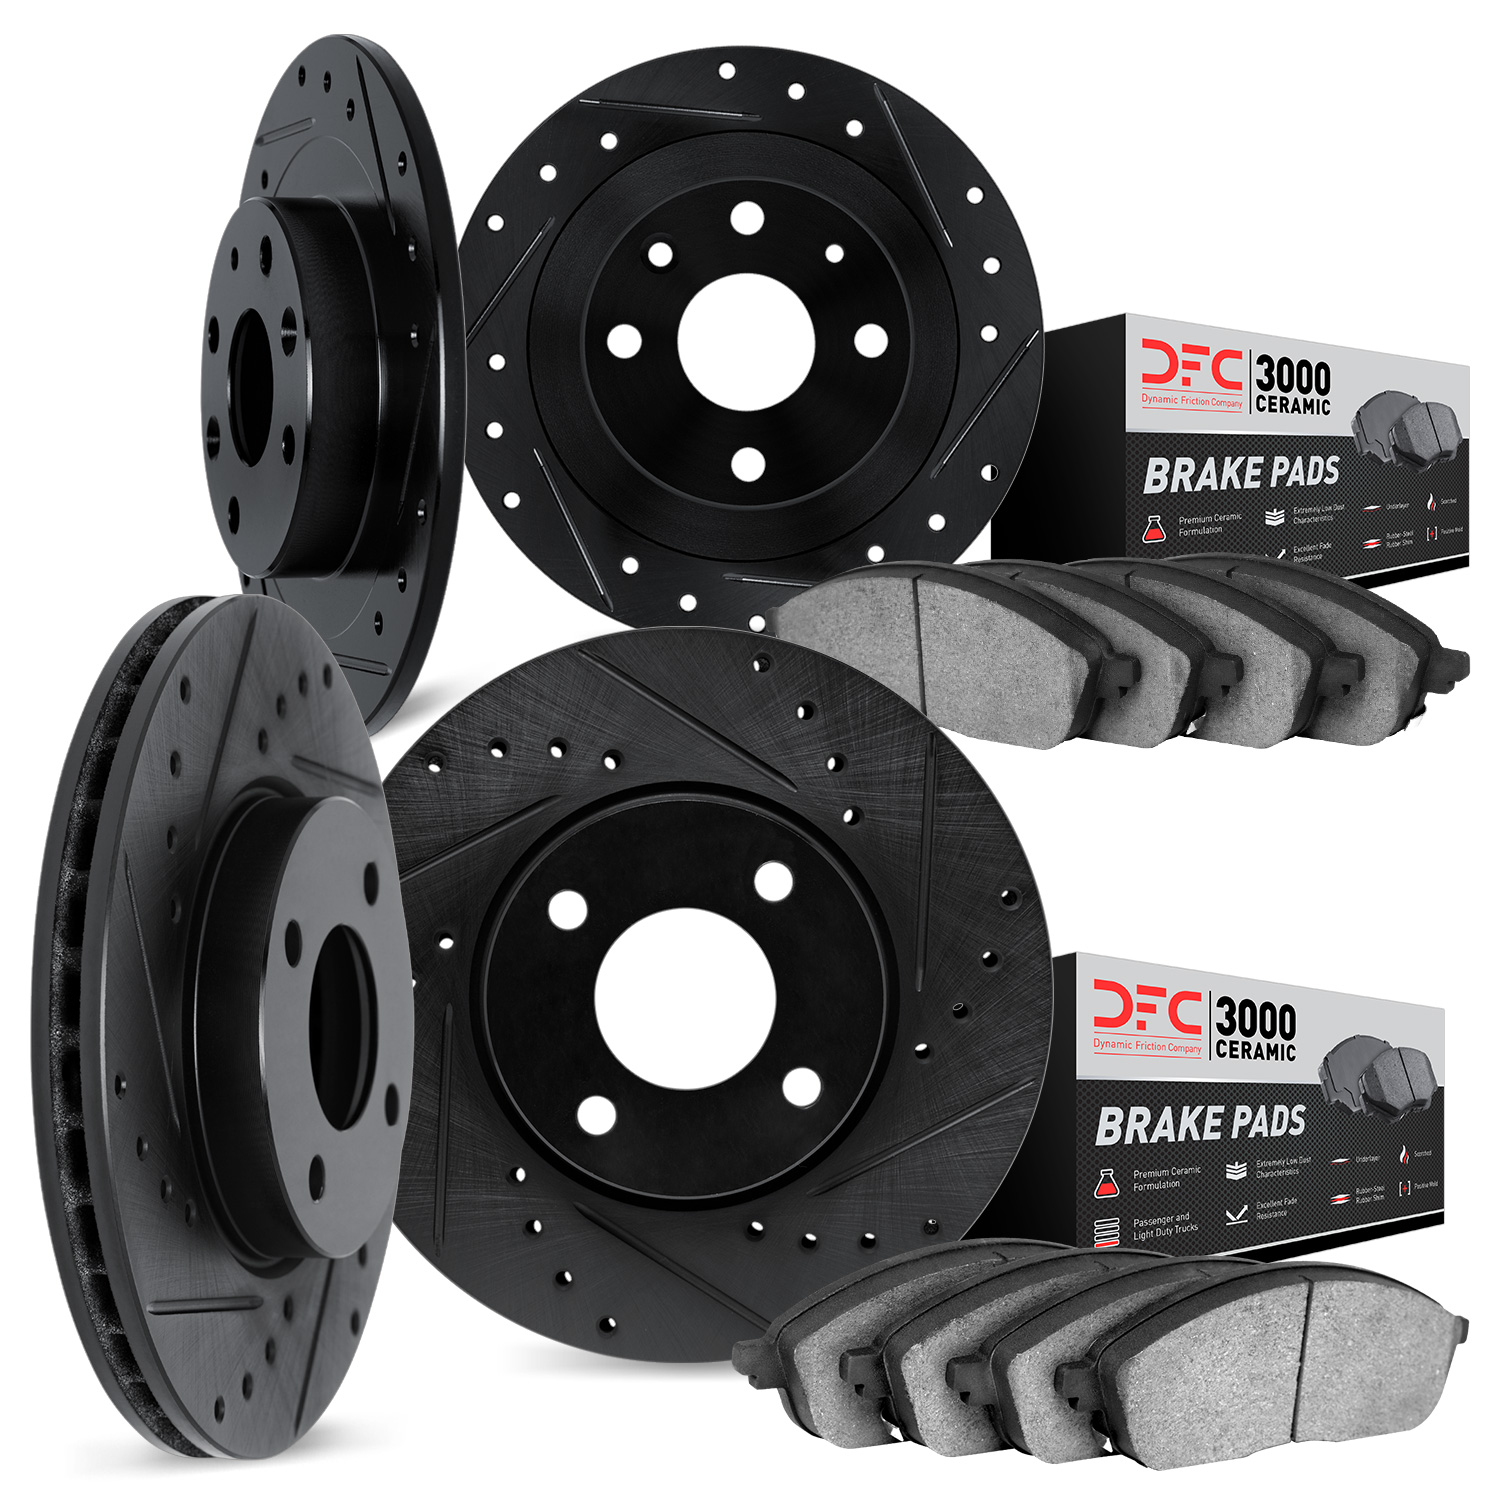 8304-59066 Drilled/Slotted Brake Rotors with 3000-Series Ceramic Brake Pads Kit [Black], 1999-2000 Acura/Honda, Position: Front